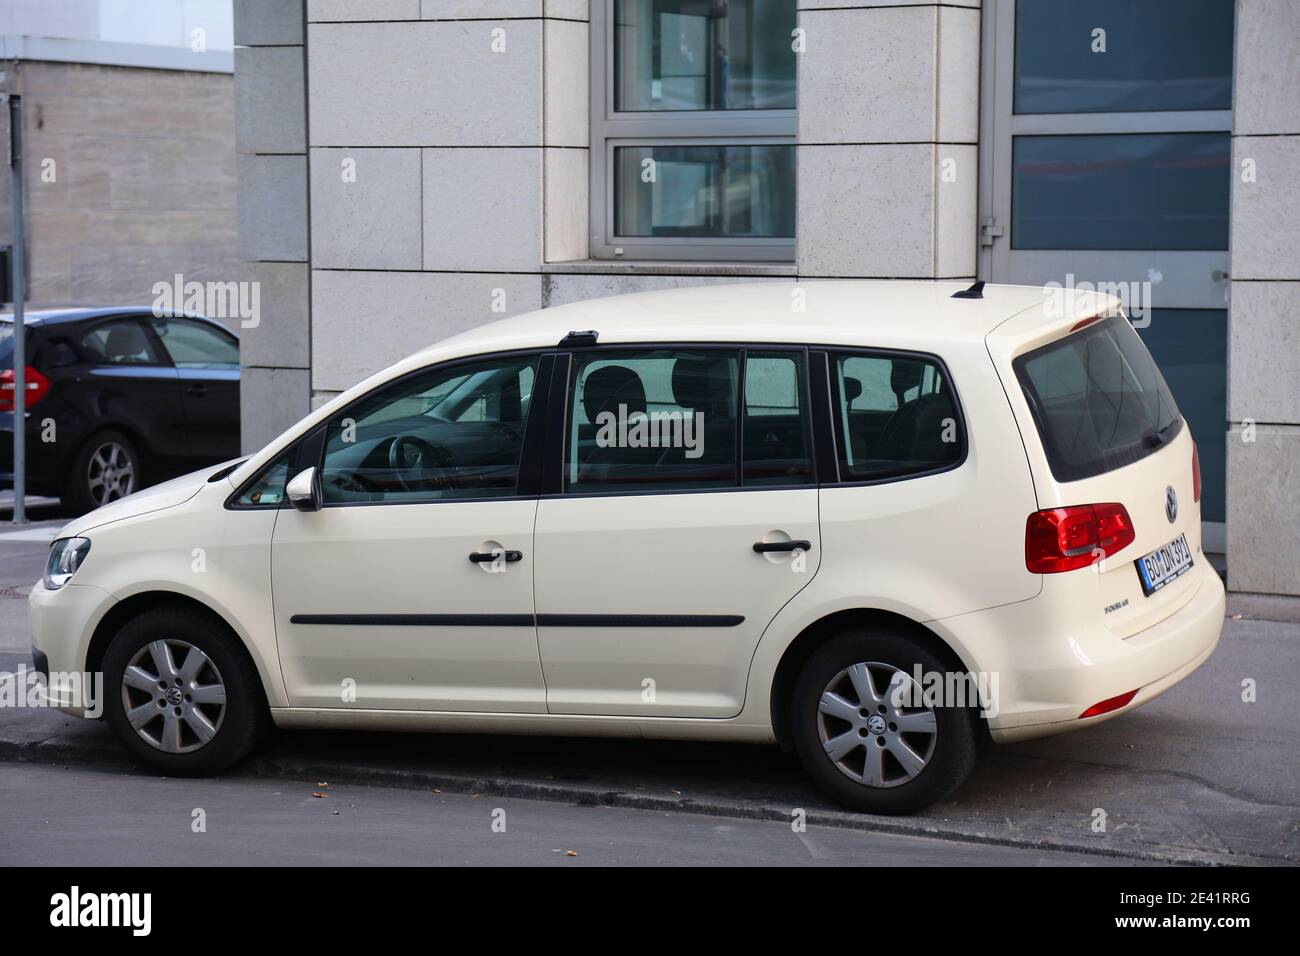 DORTMUND, GERMANY - SEPTEMBER 16, 2020: Volkswagen Touran family car parked  in Germany. There were 45.8 million cars registered in Germany (as of 2017  Stock Photo - Alamy